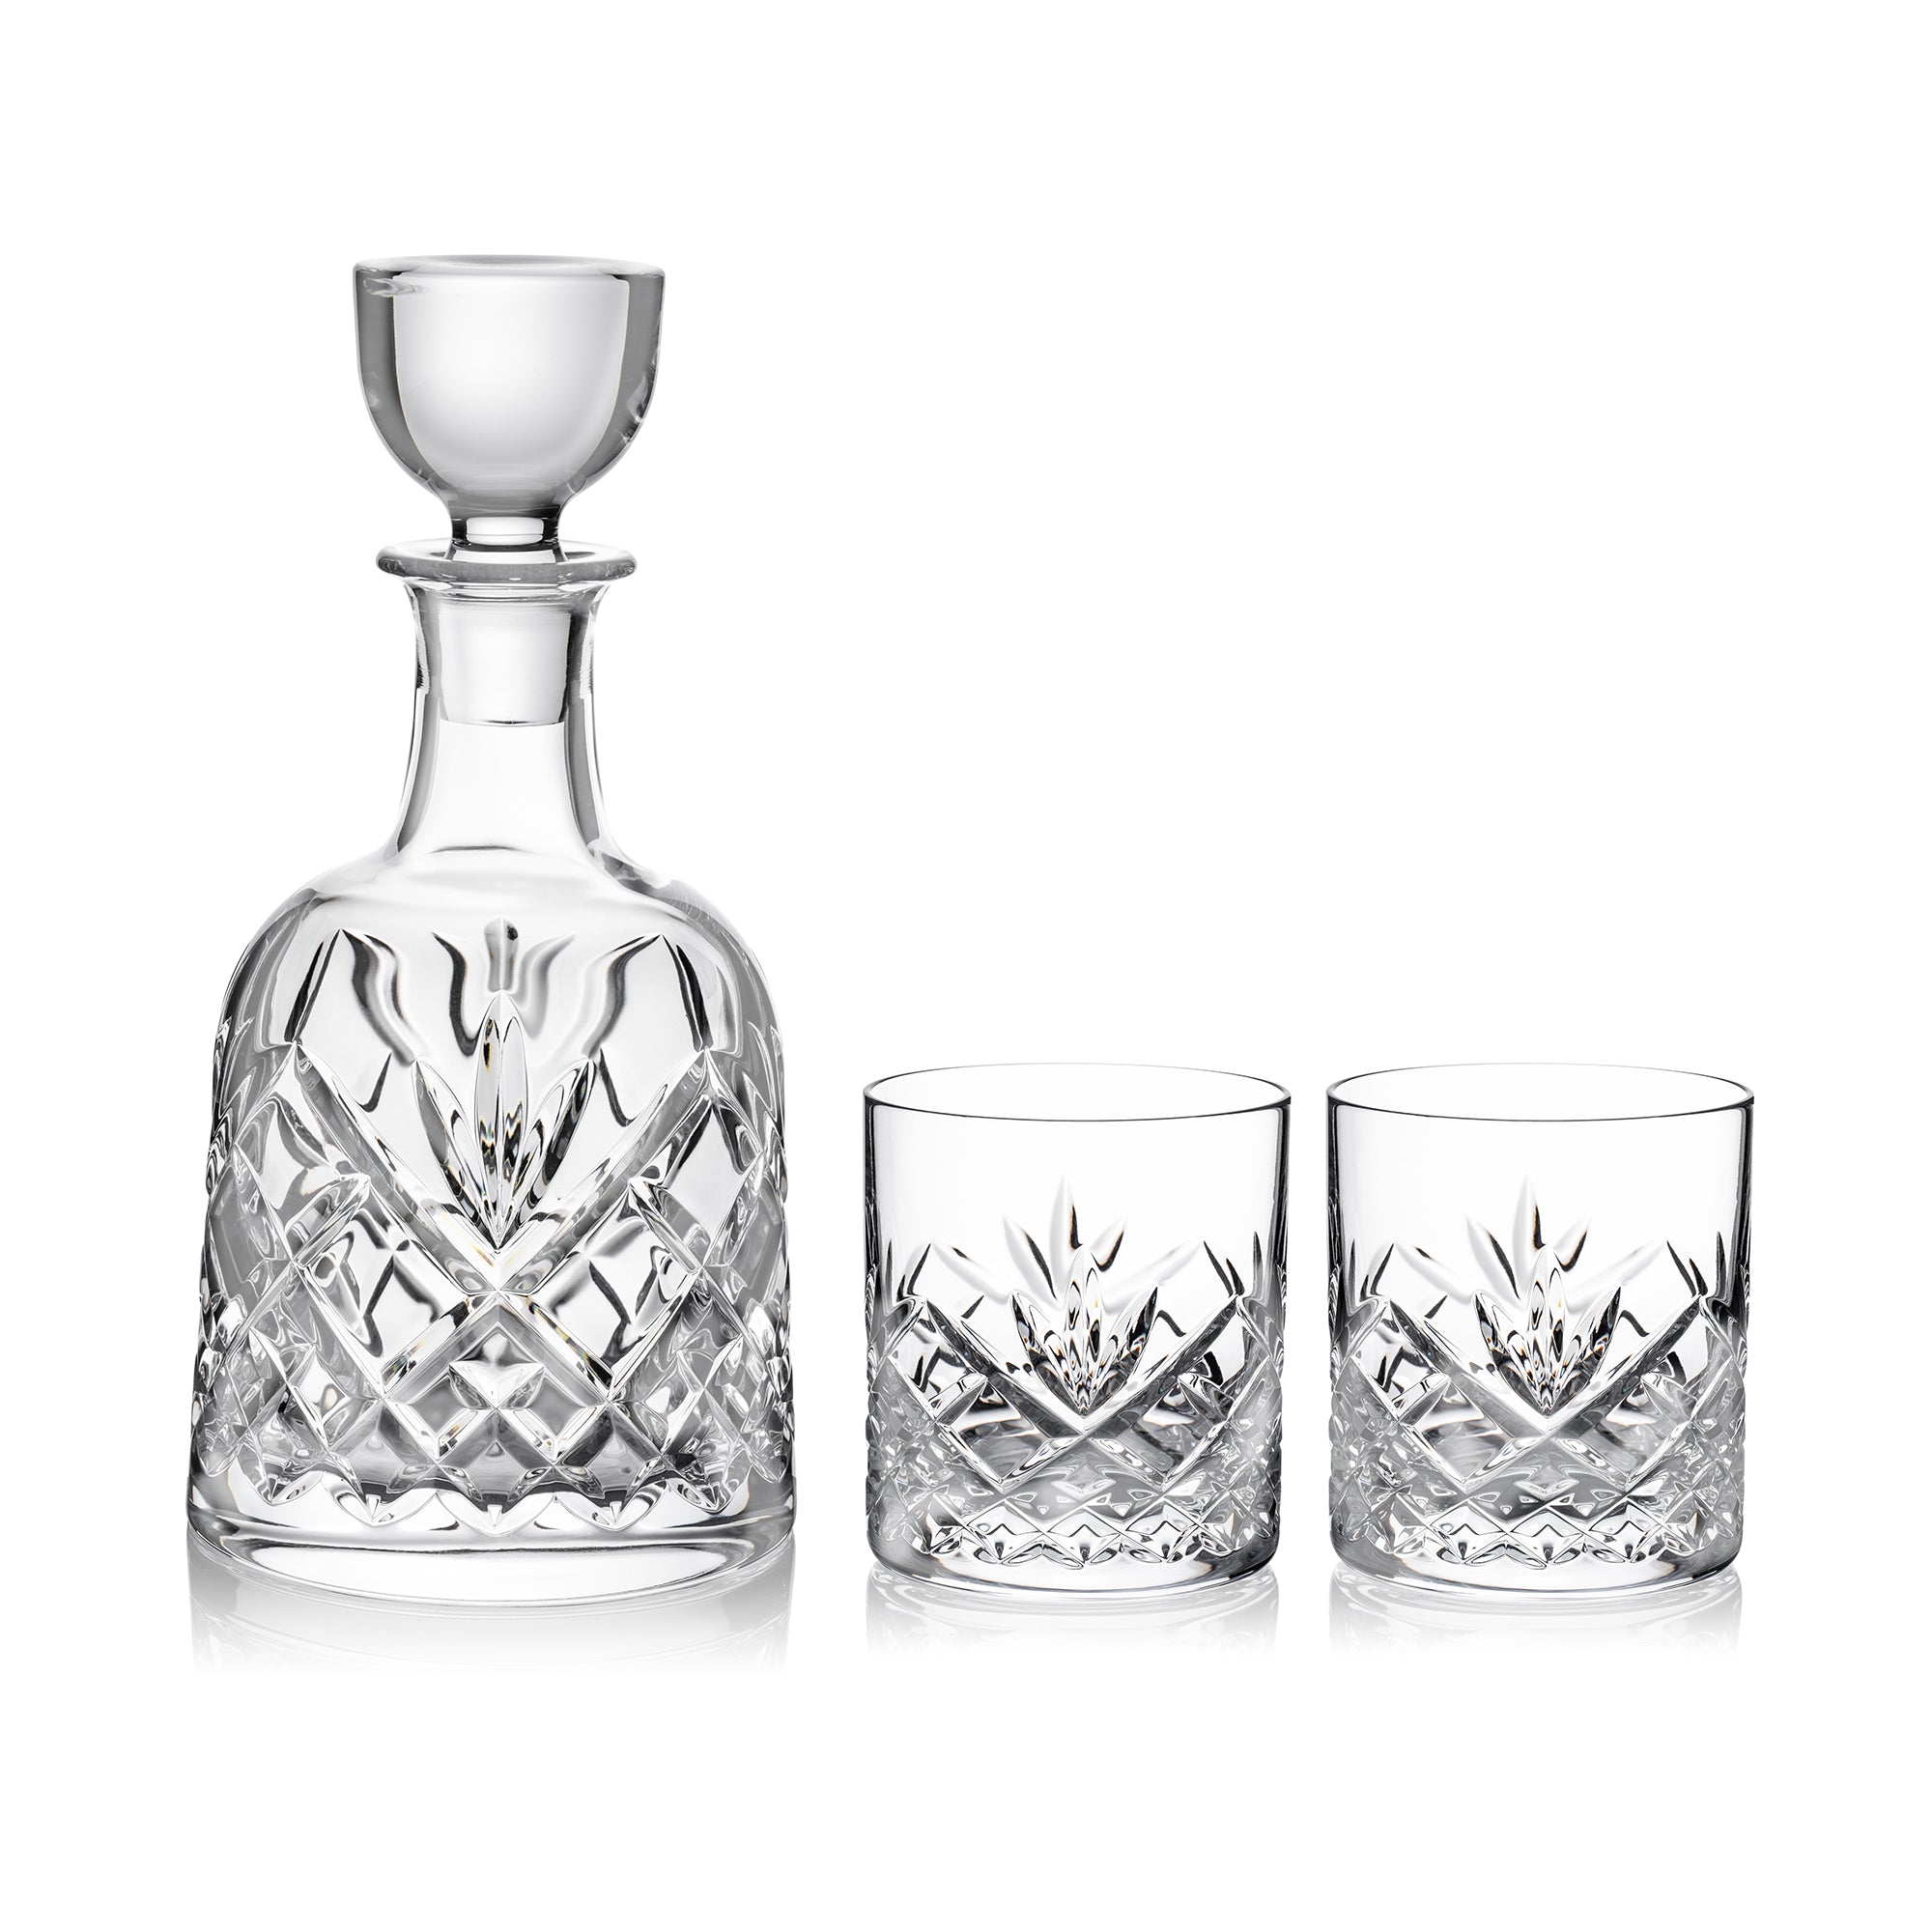 Marquis by Waterford Markham Whiskey Decanter Set & 2 Tumblers - Royal Gift